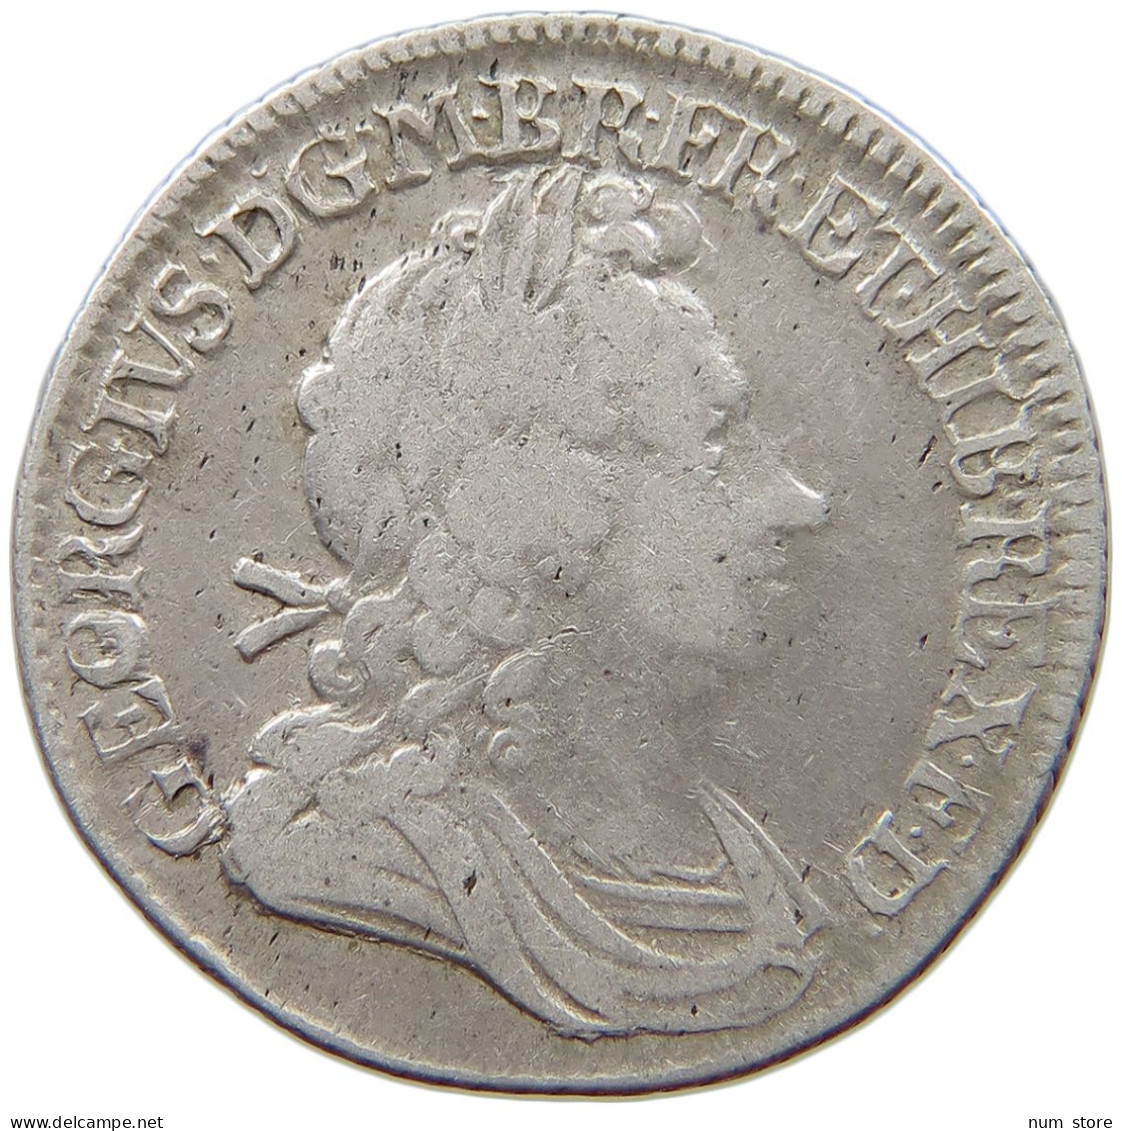 GREAT BRITAIN SHILLING 1720 George I. (1714-1727) #t148 0249 - H. 1 Shilling